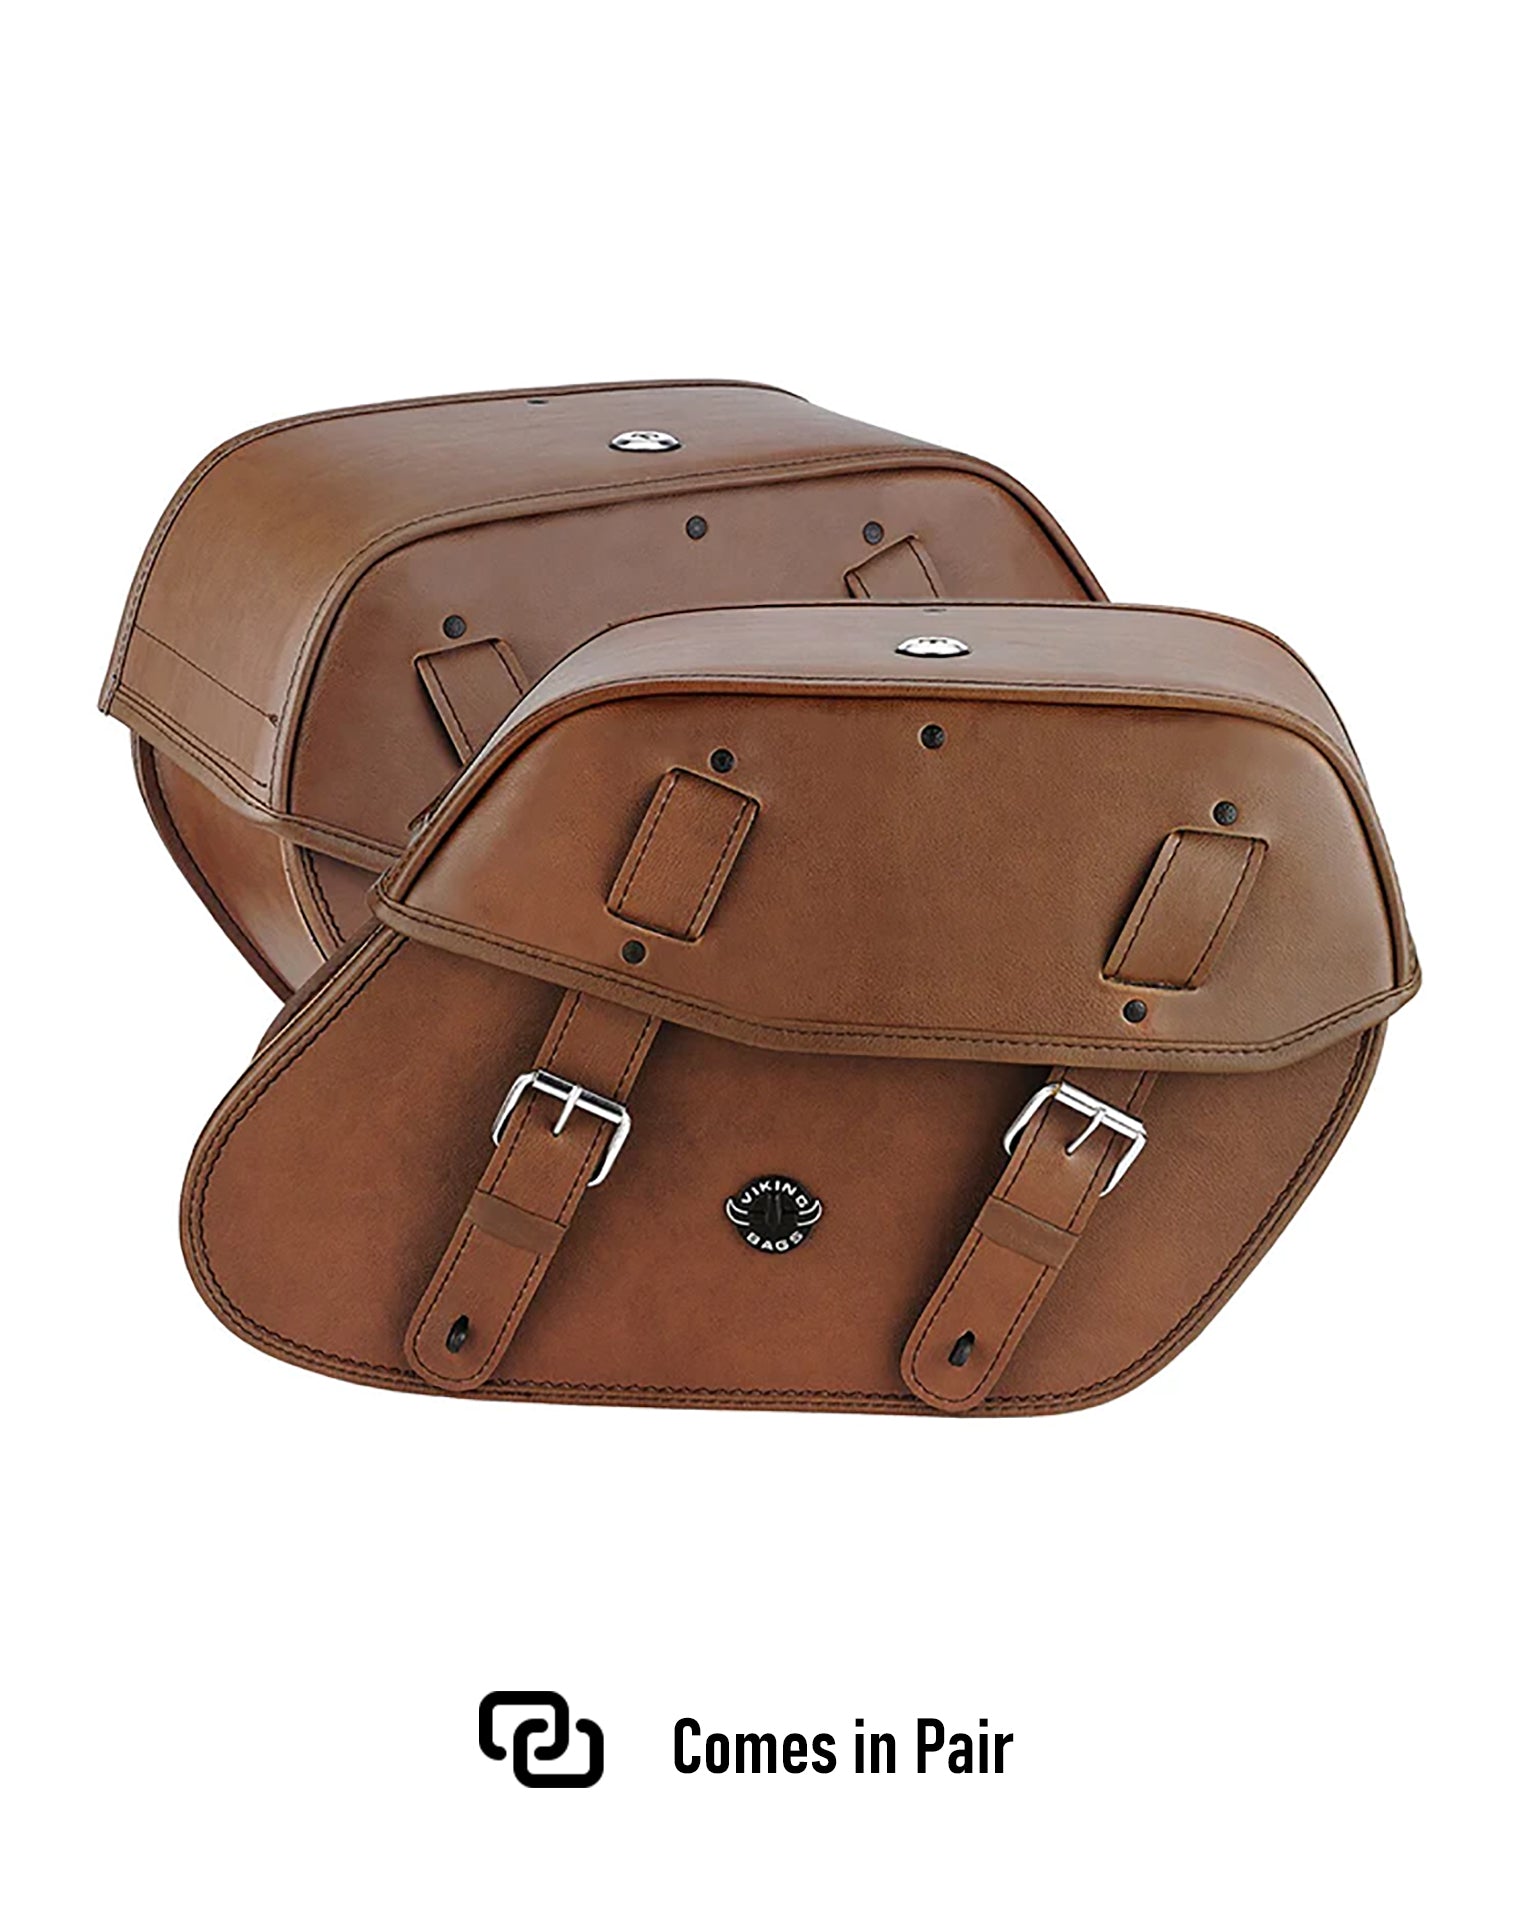 Viking Odin Brown Large Indian Springfield Leather Motorcycle Saddlebags Weather Resistant Bags Comes in Pair